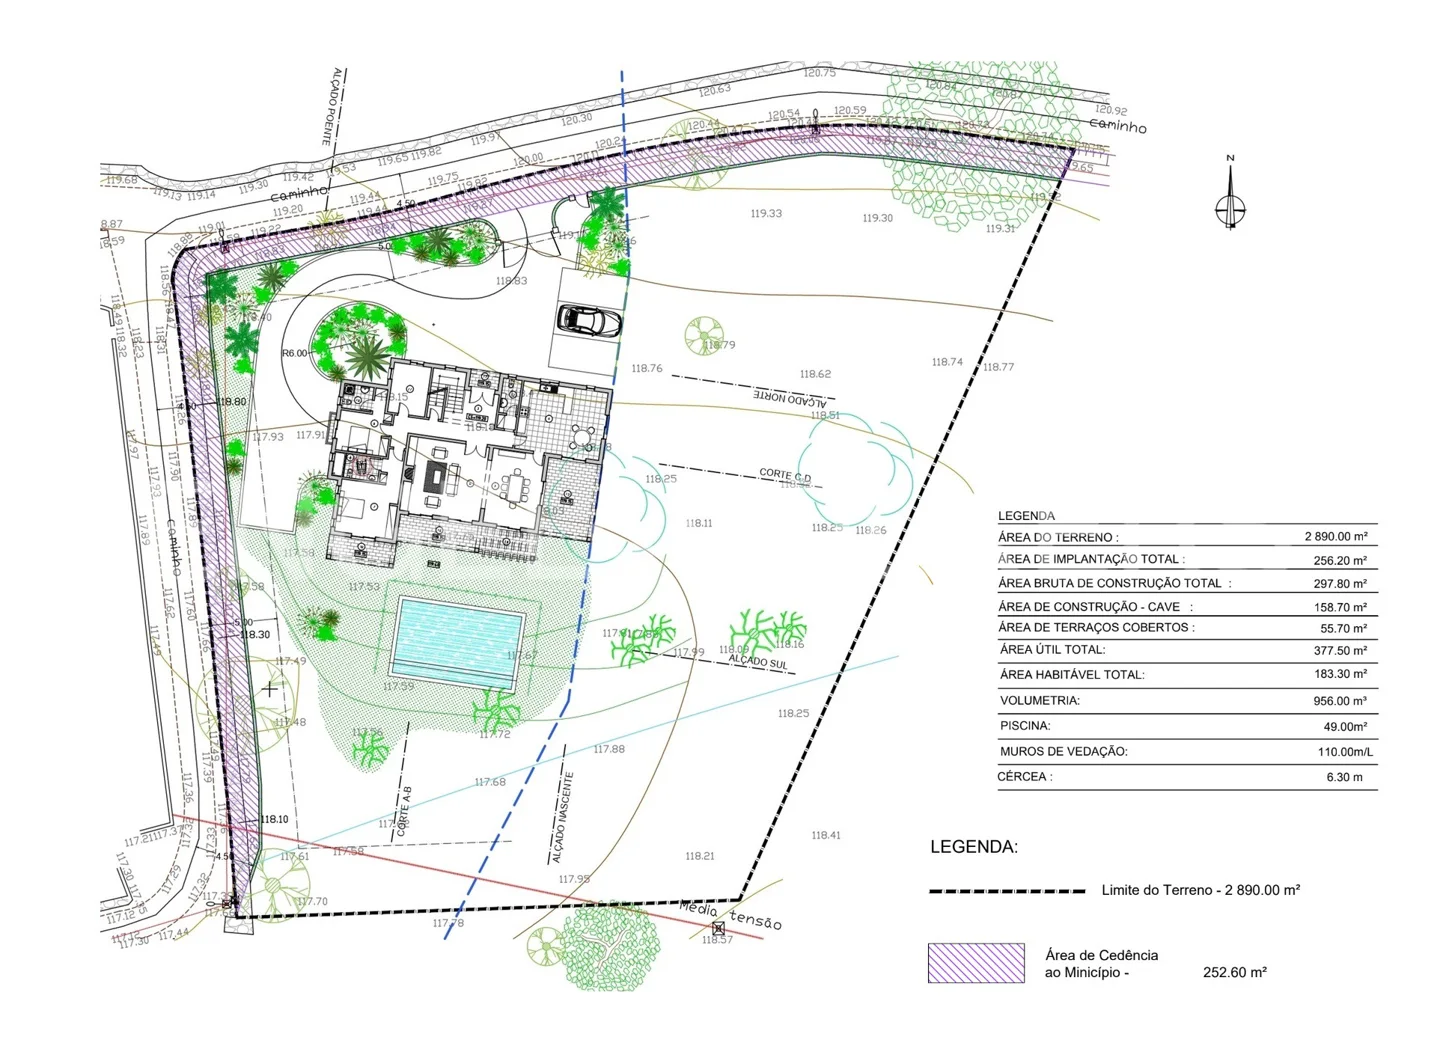 Exclusive Land with PIP Approved for construction of a Villa